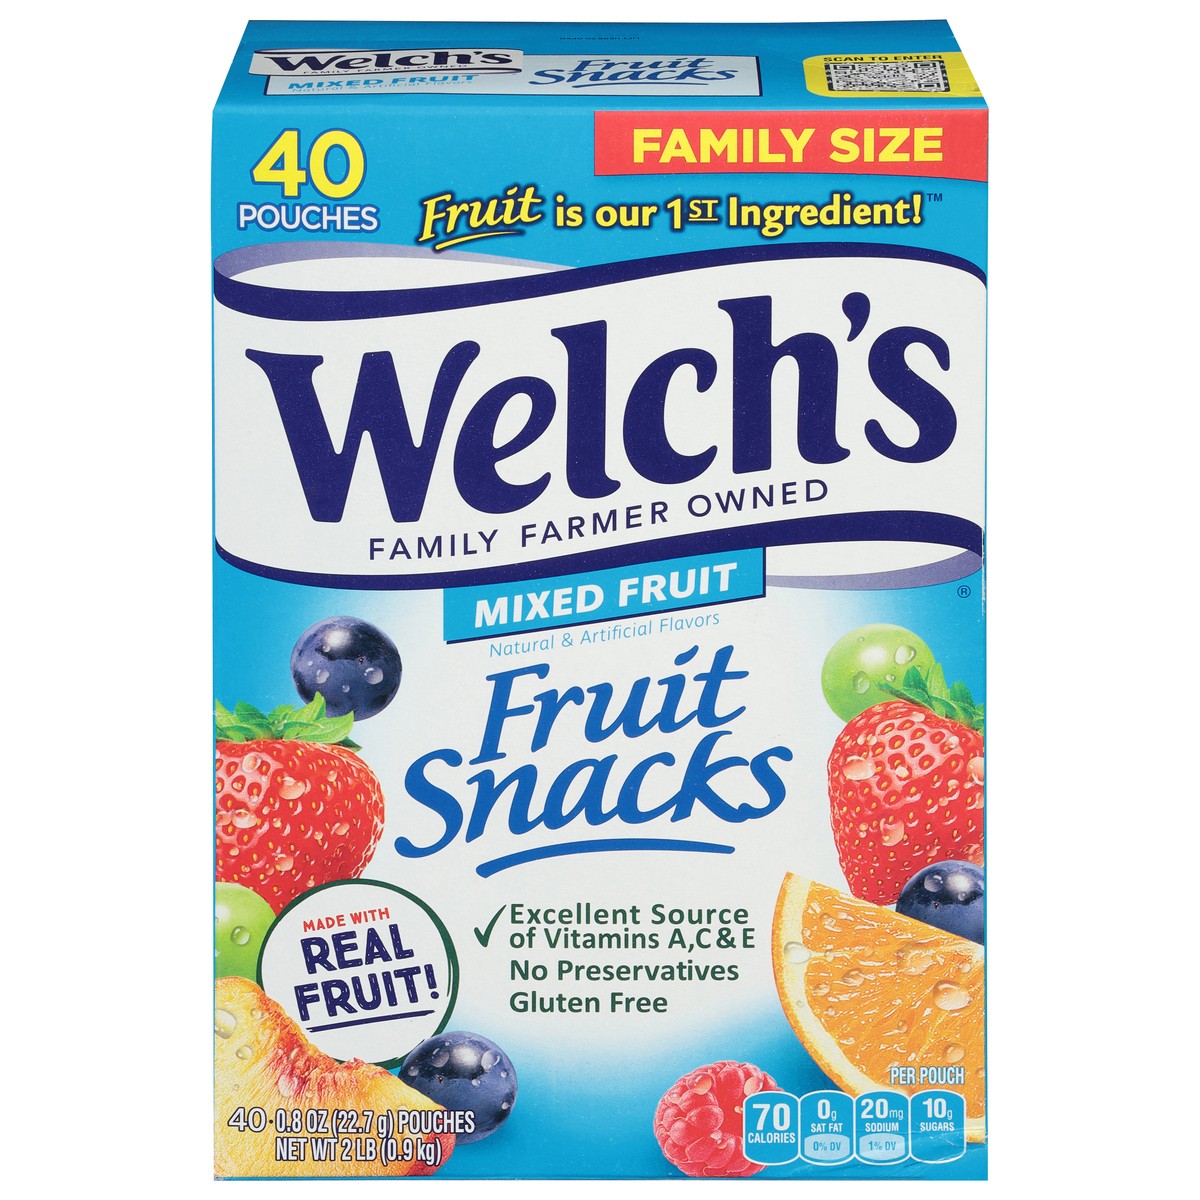 slide 1 of 7, Welch's Mixed Fruit Fruit Snacks Family Size 40 - 0.8 oz Pouches, 40 ct